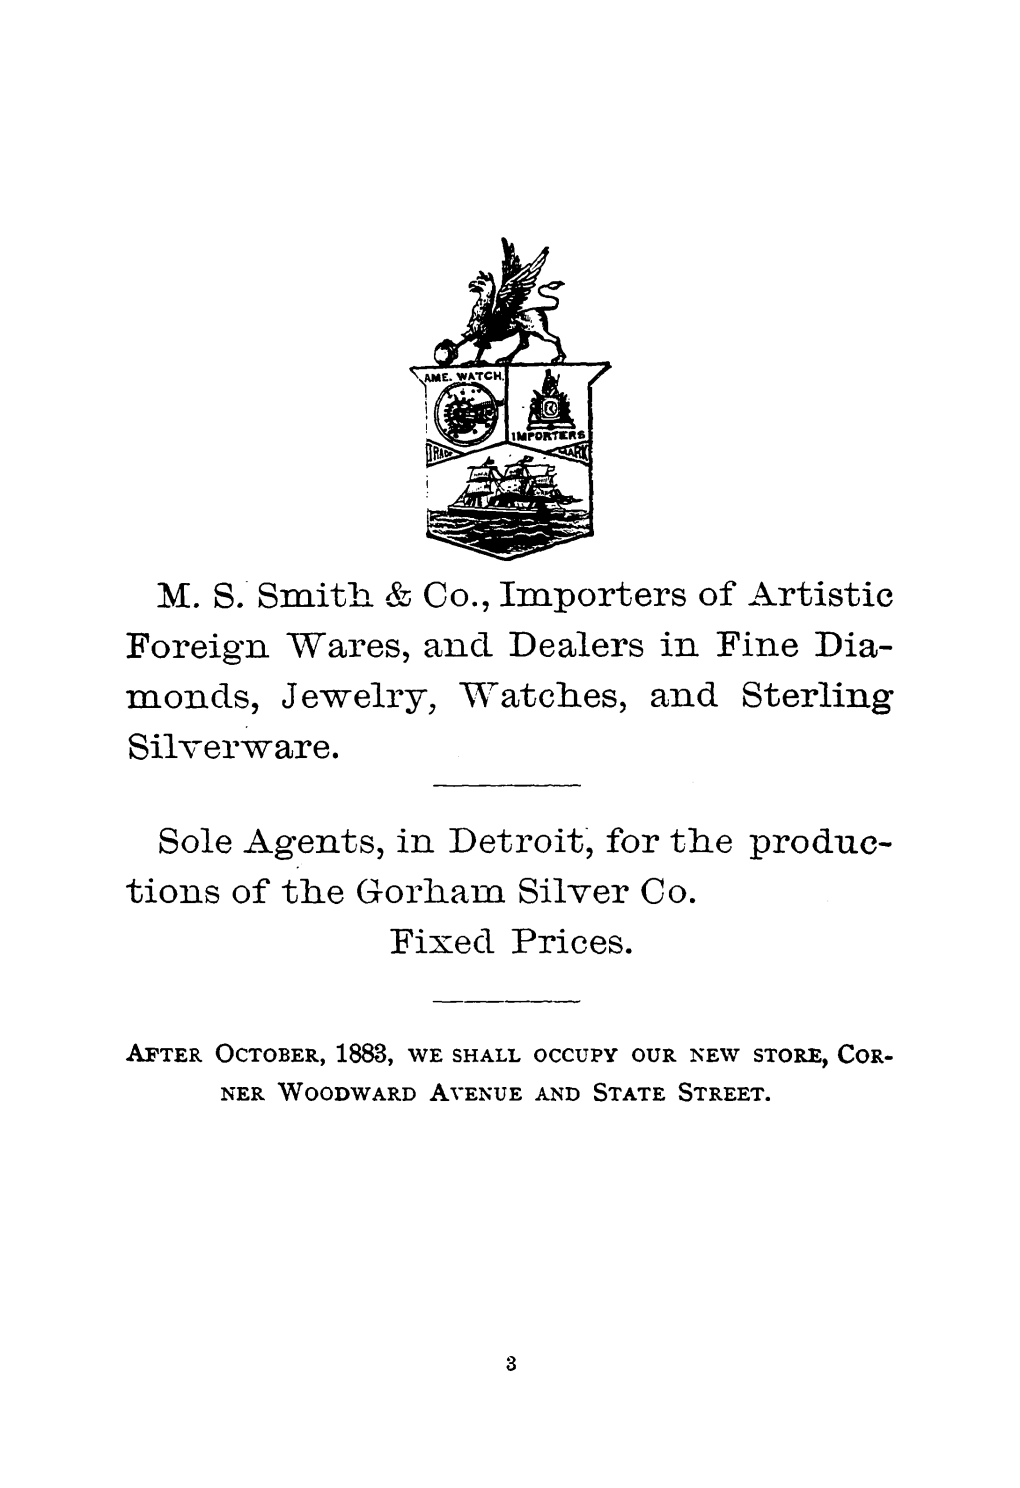 Monds, Jewelry, "Ratches, and Sterling Sil·Yerware